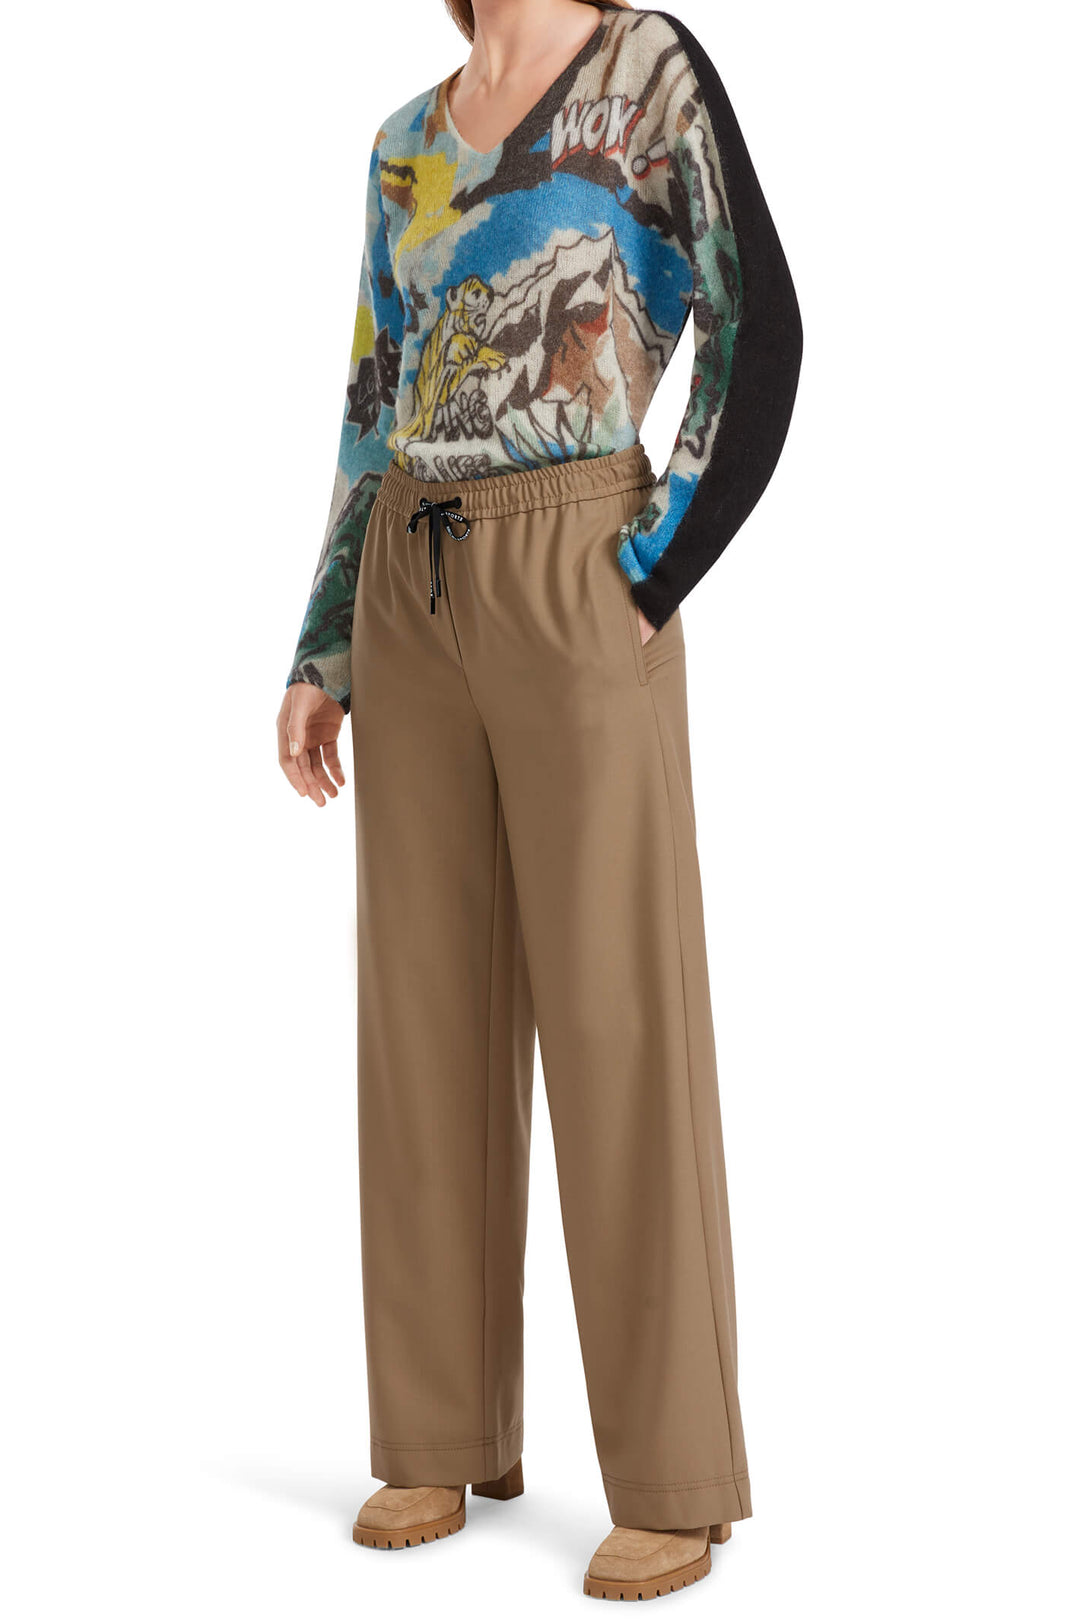 Marc Cain Sports VS 81.02 W46 Welby Soft Coffee Wide Fit Trousers - Olivia Grace Fashion